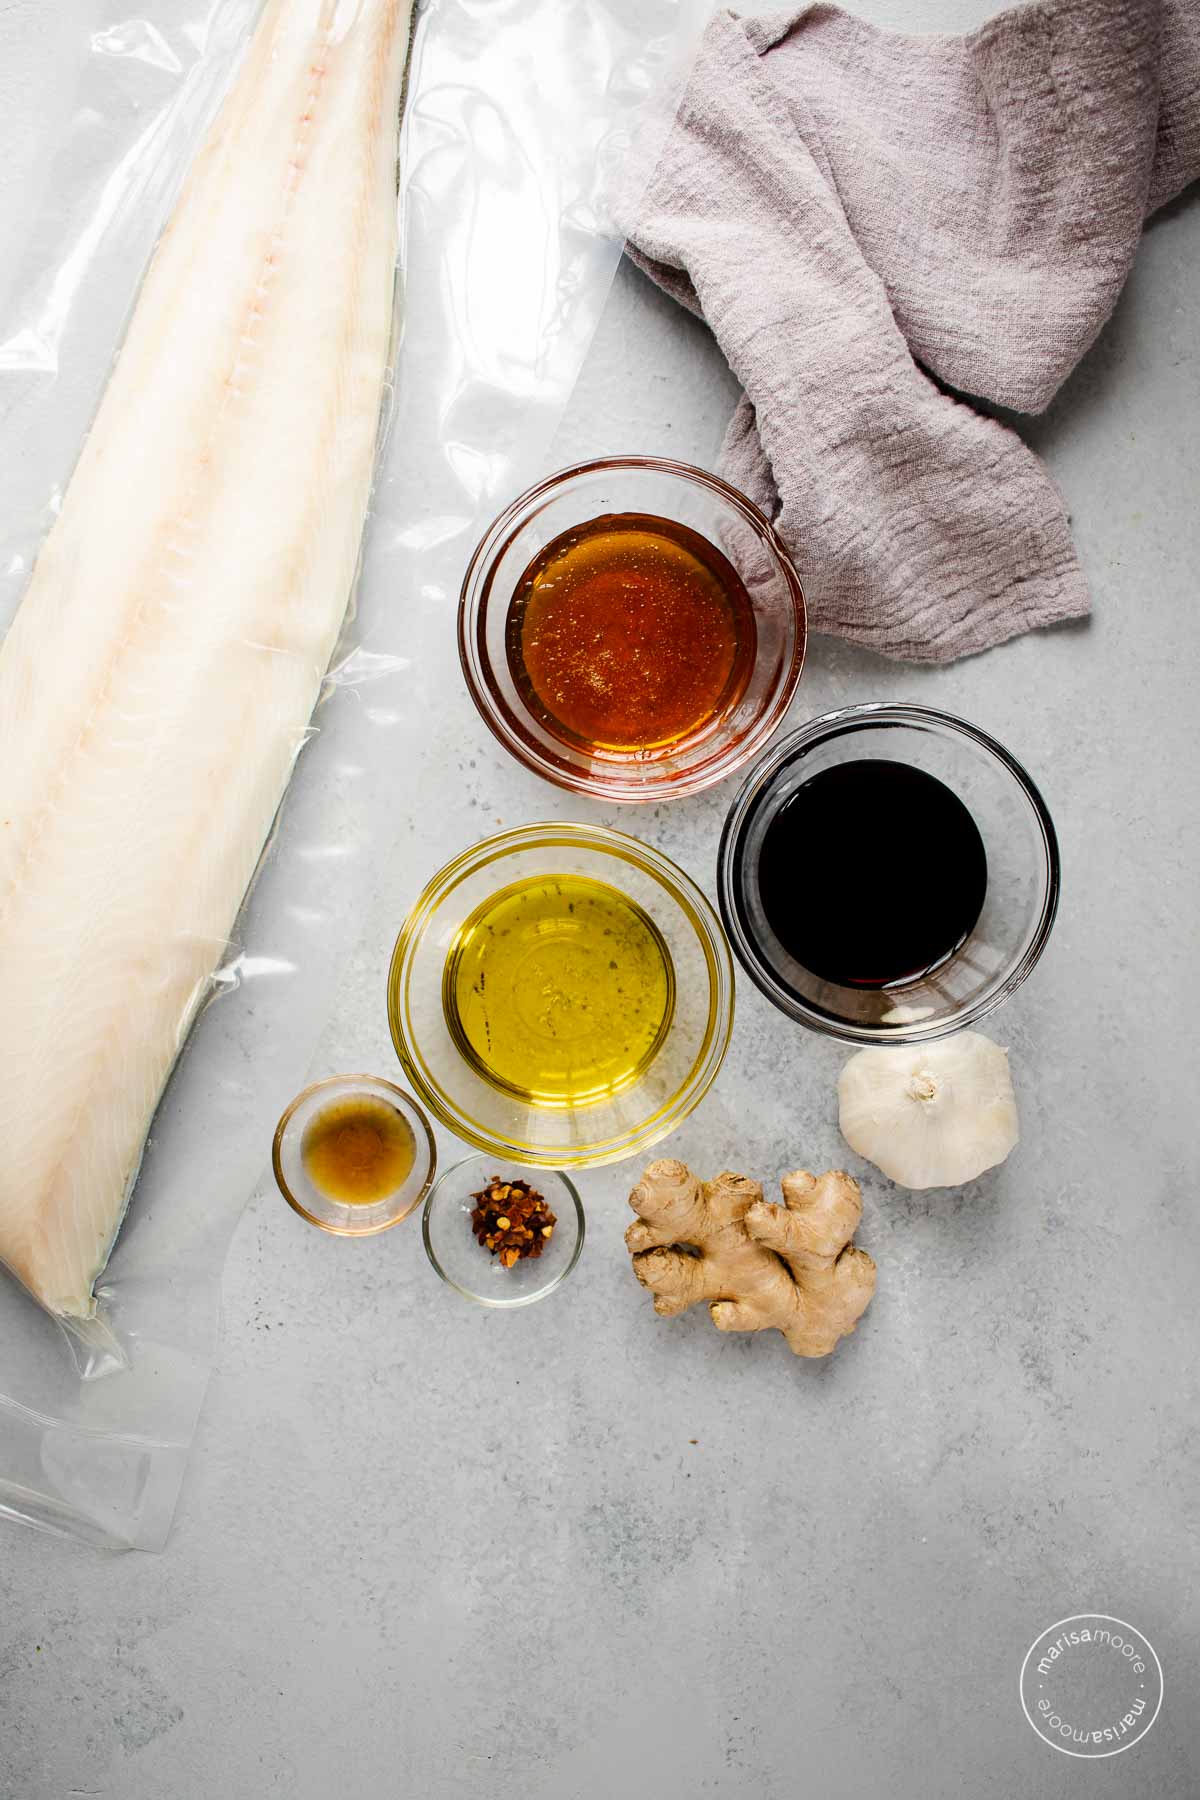 Ingredients on a grey board. Sablefish in plastic, honey, oil, soy sauce, sesame oil, red pepper flakes in bowls, whole pieces of garlic and ginger.